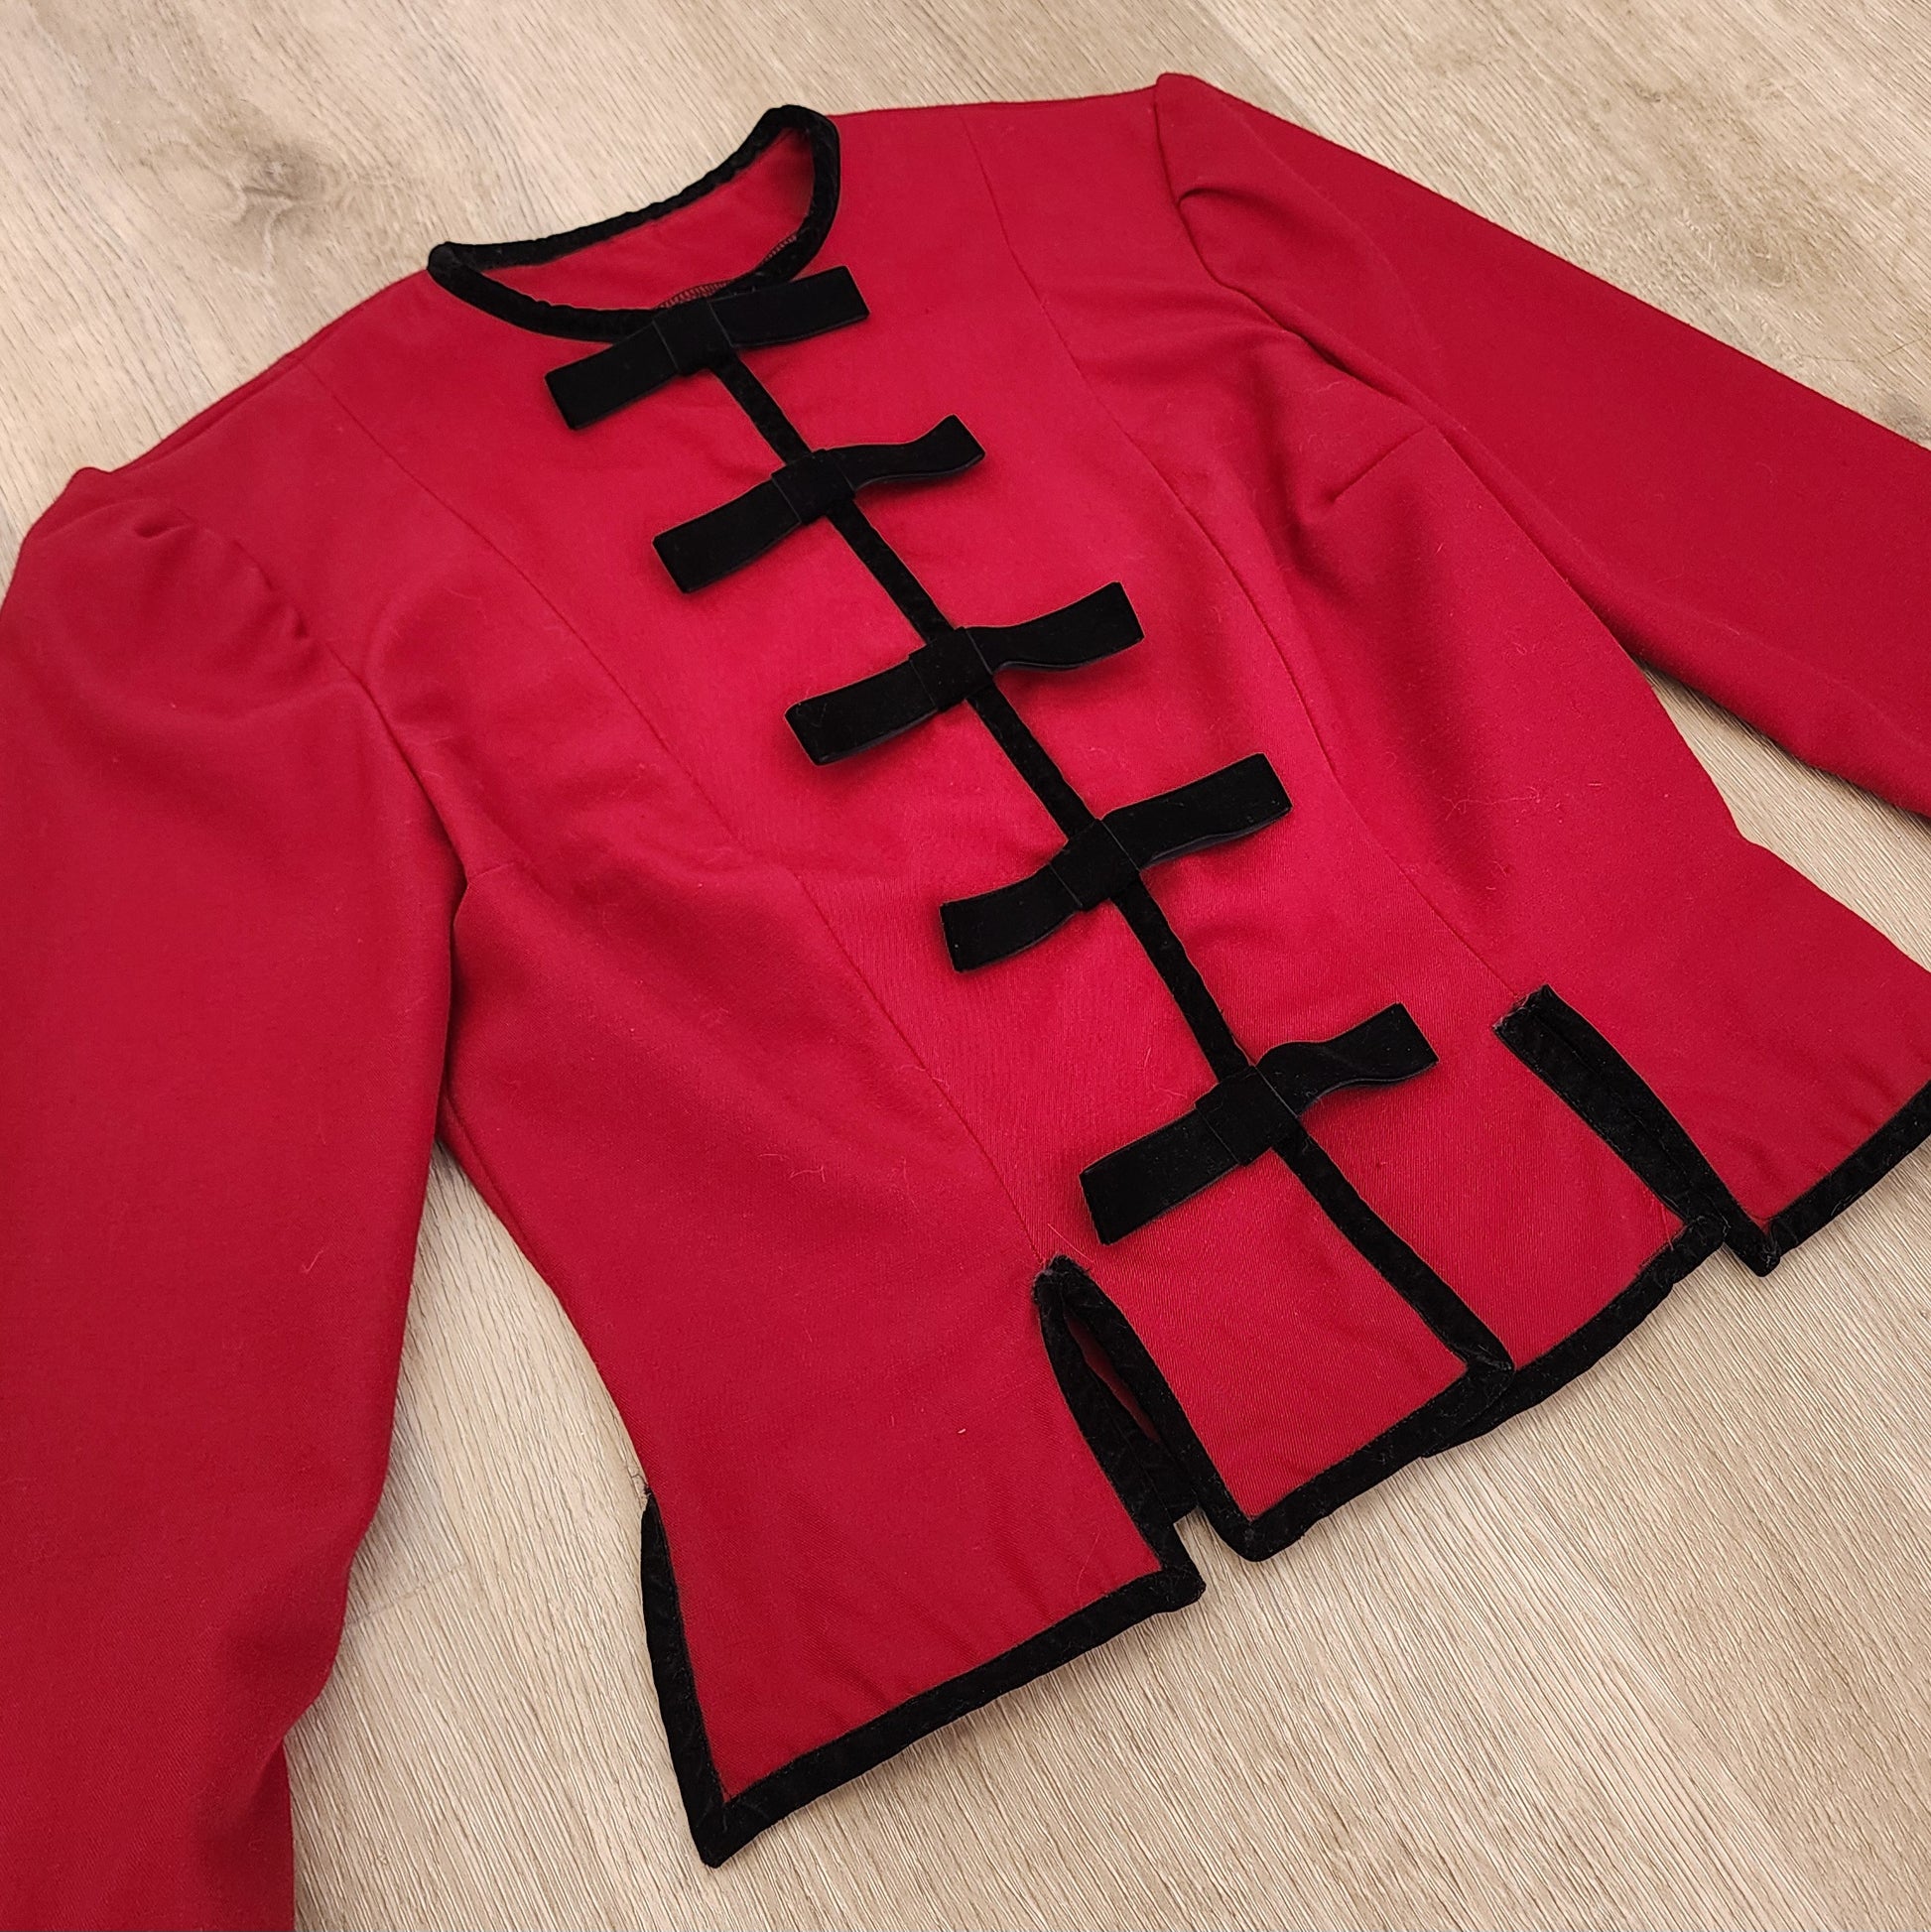 Red Vintage Inspired Blazer by Hollyville